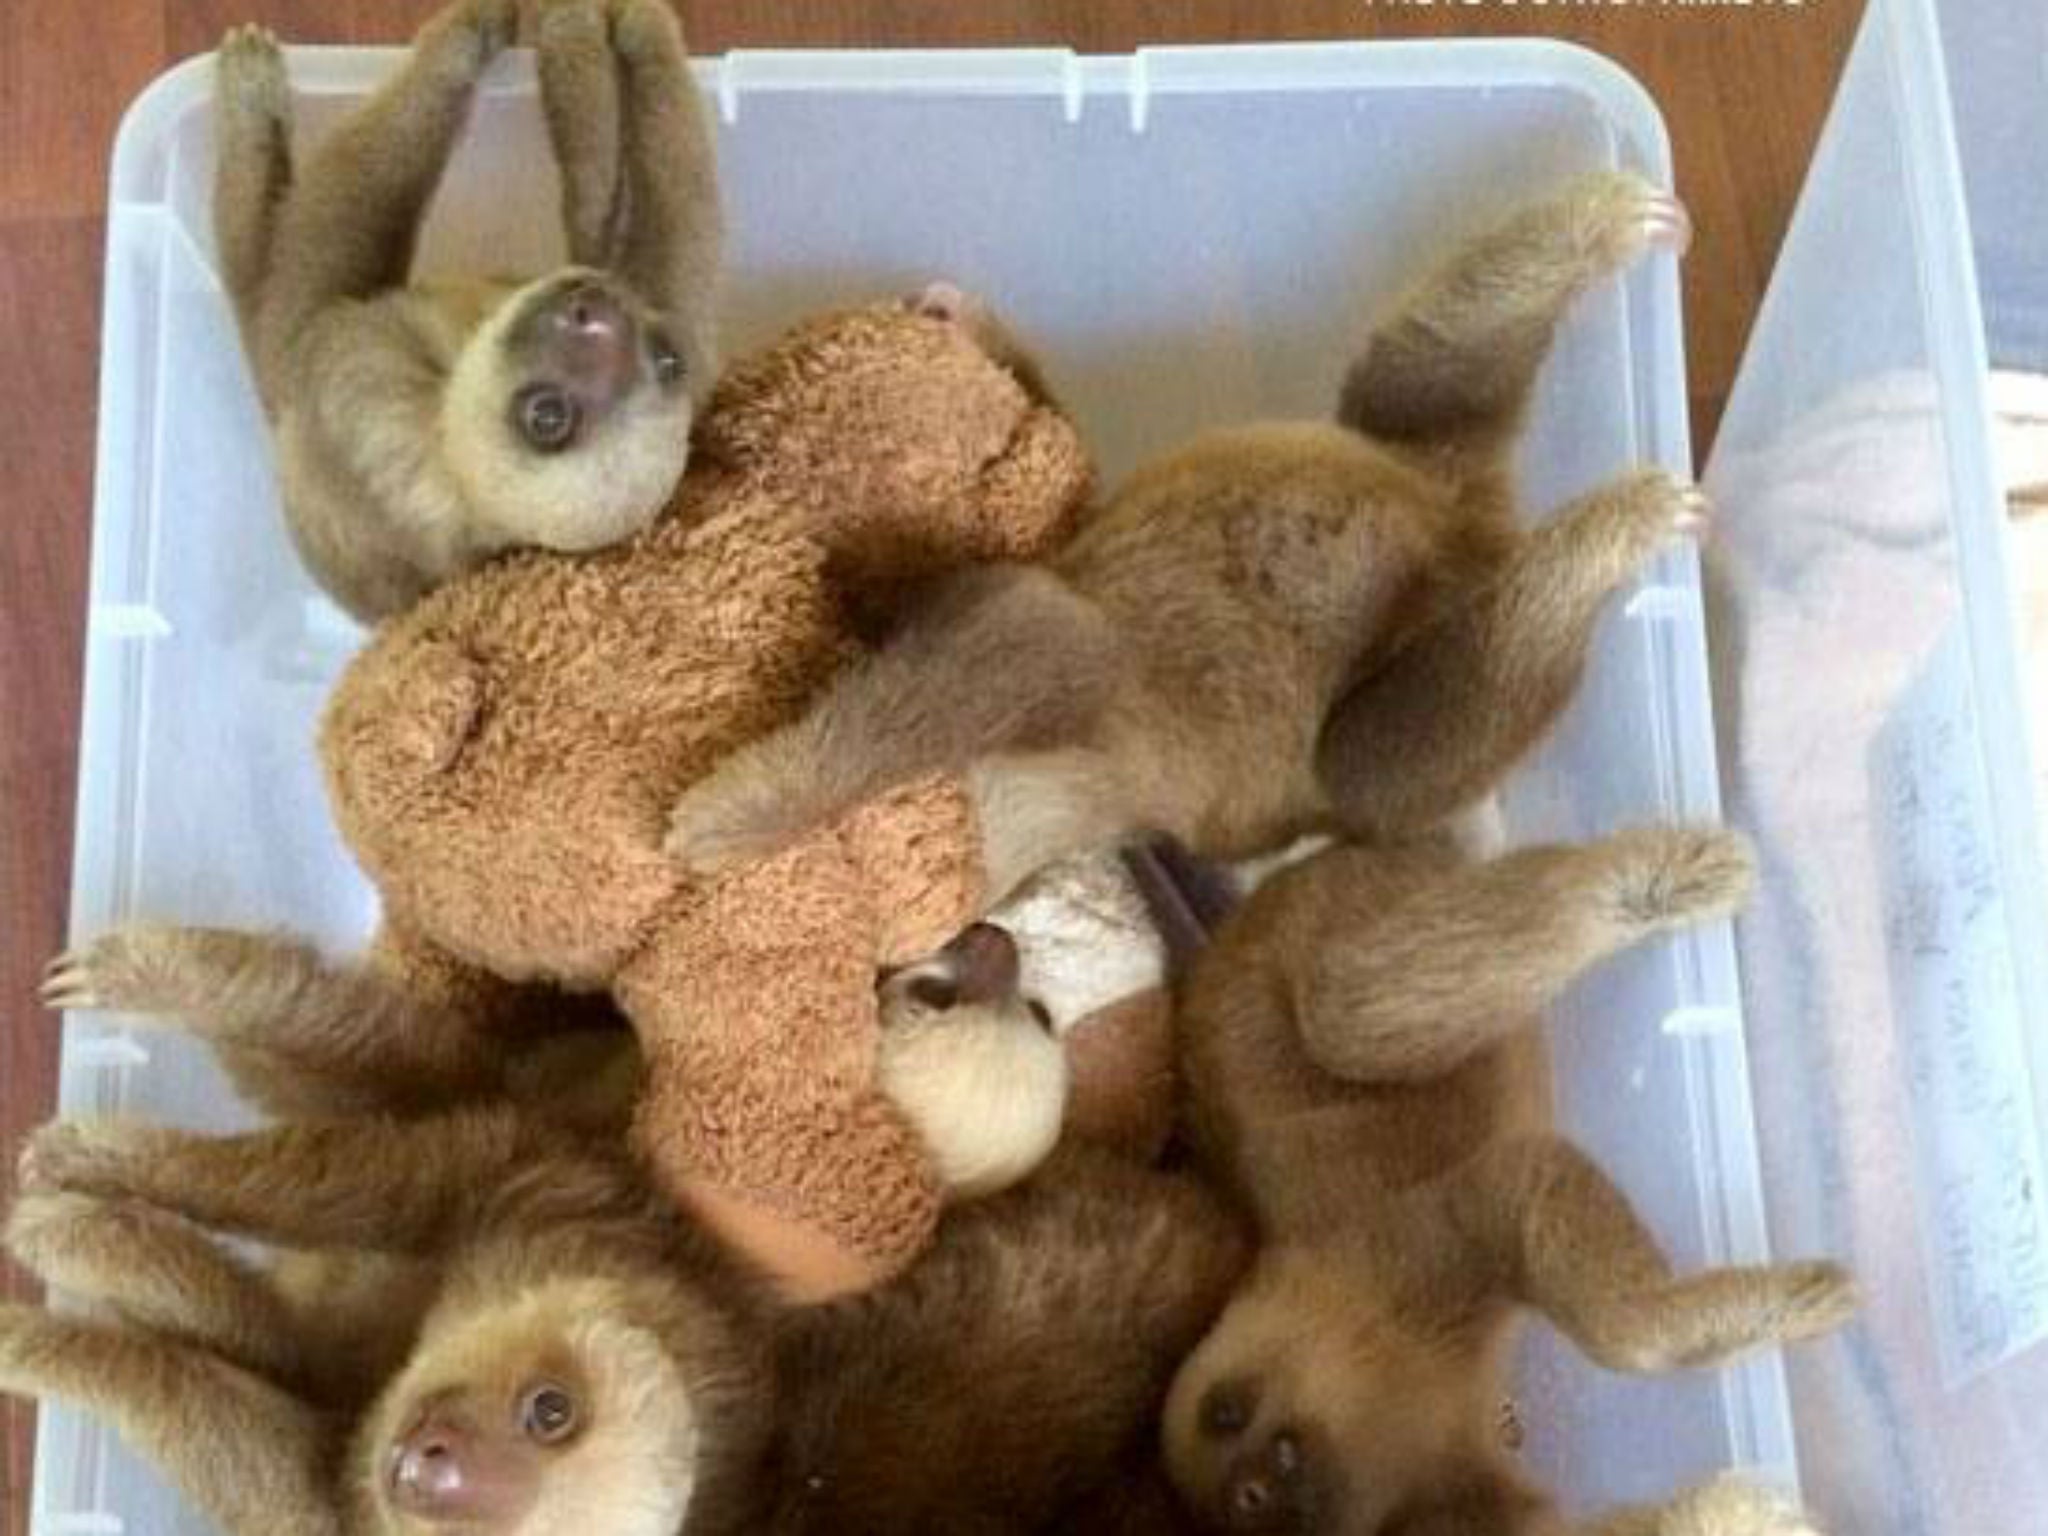 &#13;
Babies were put in platic boxes with stuffed animals &#13;